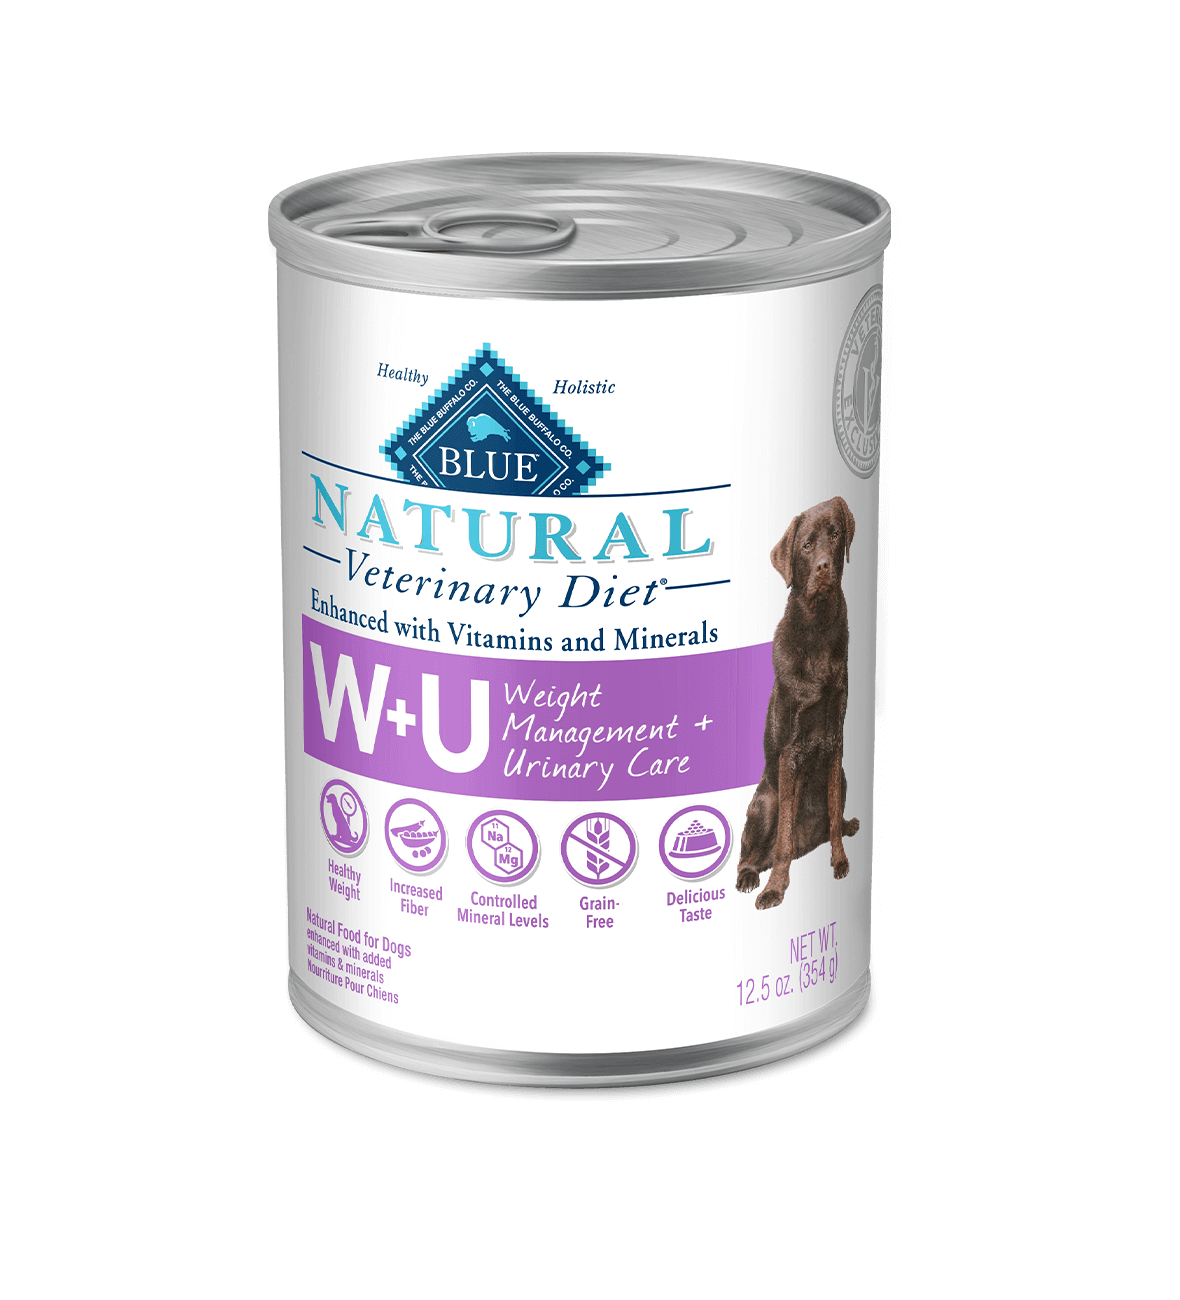 blue natural veterinary diet w+u weight management & urinary care dog wet food